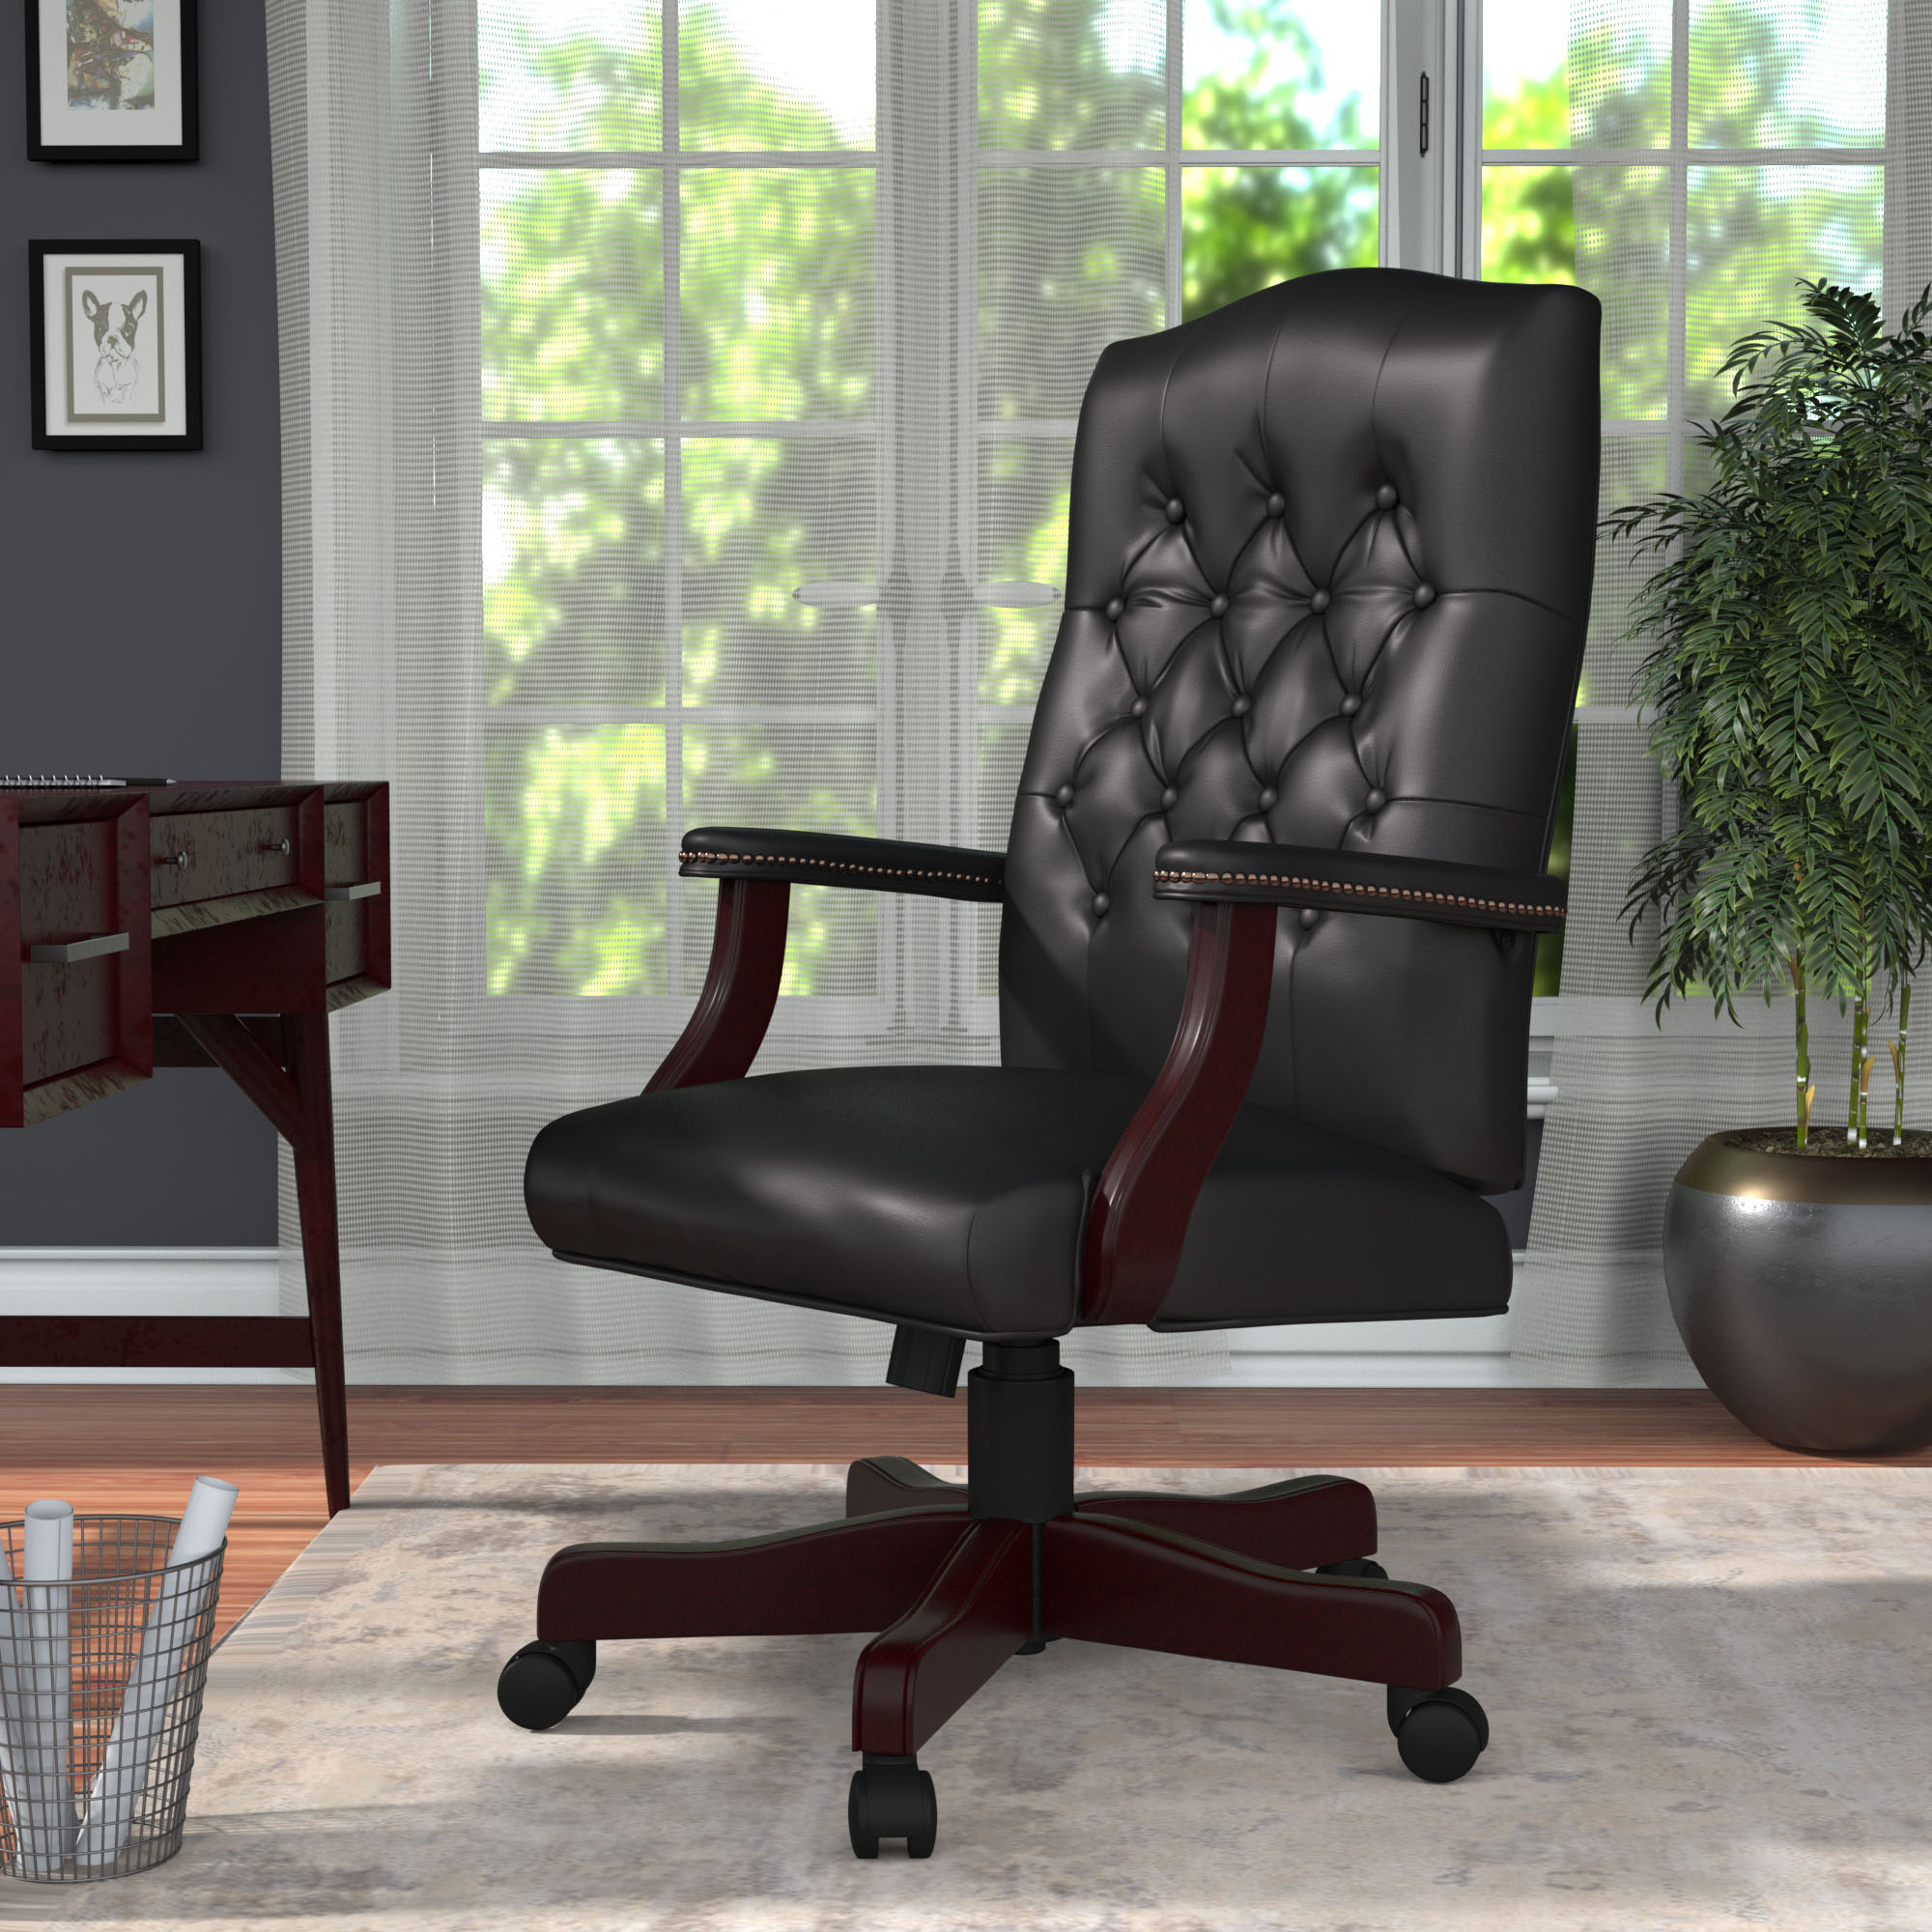 Boss Office Products B905-BK Classic Executive Caressoft Chair with Mahogany Finish in Black 